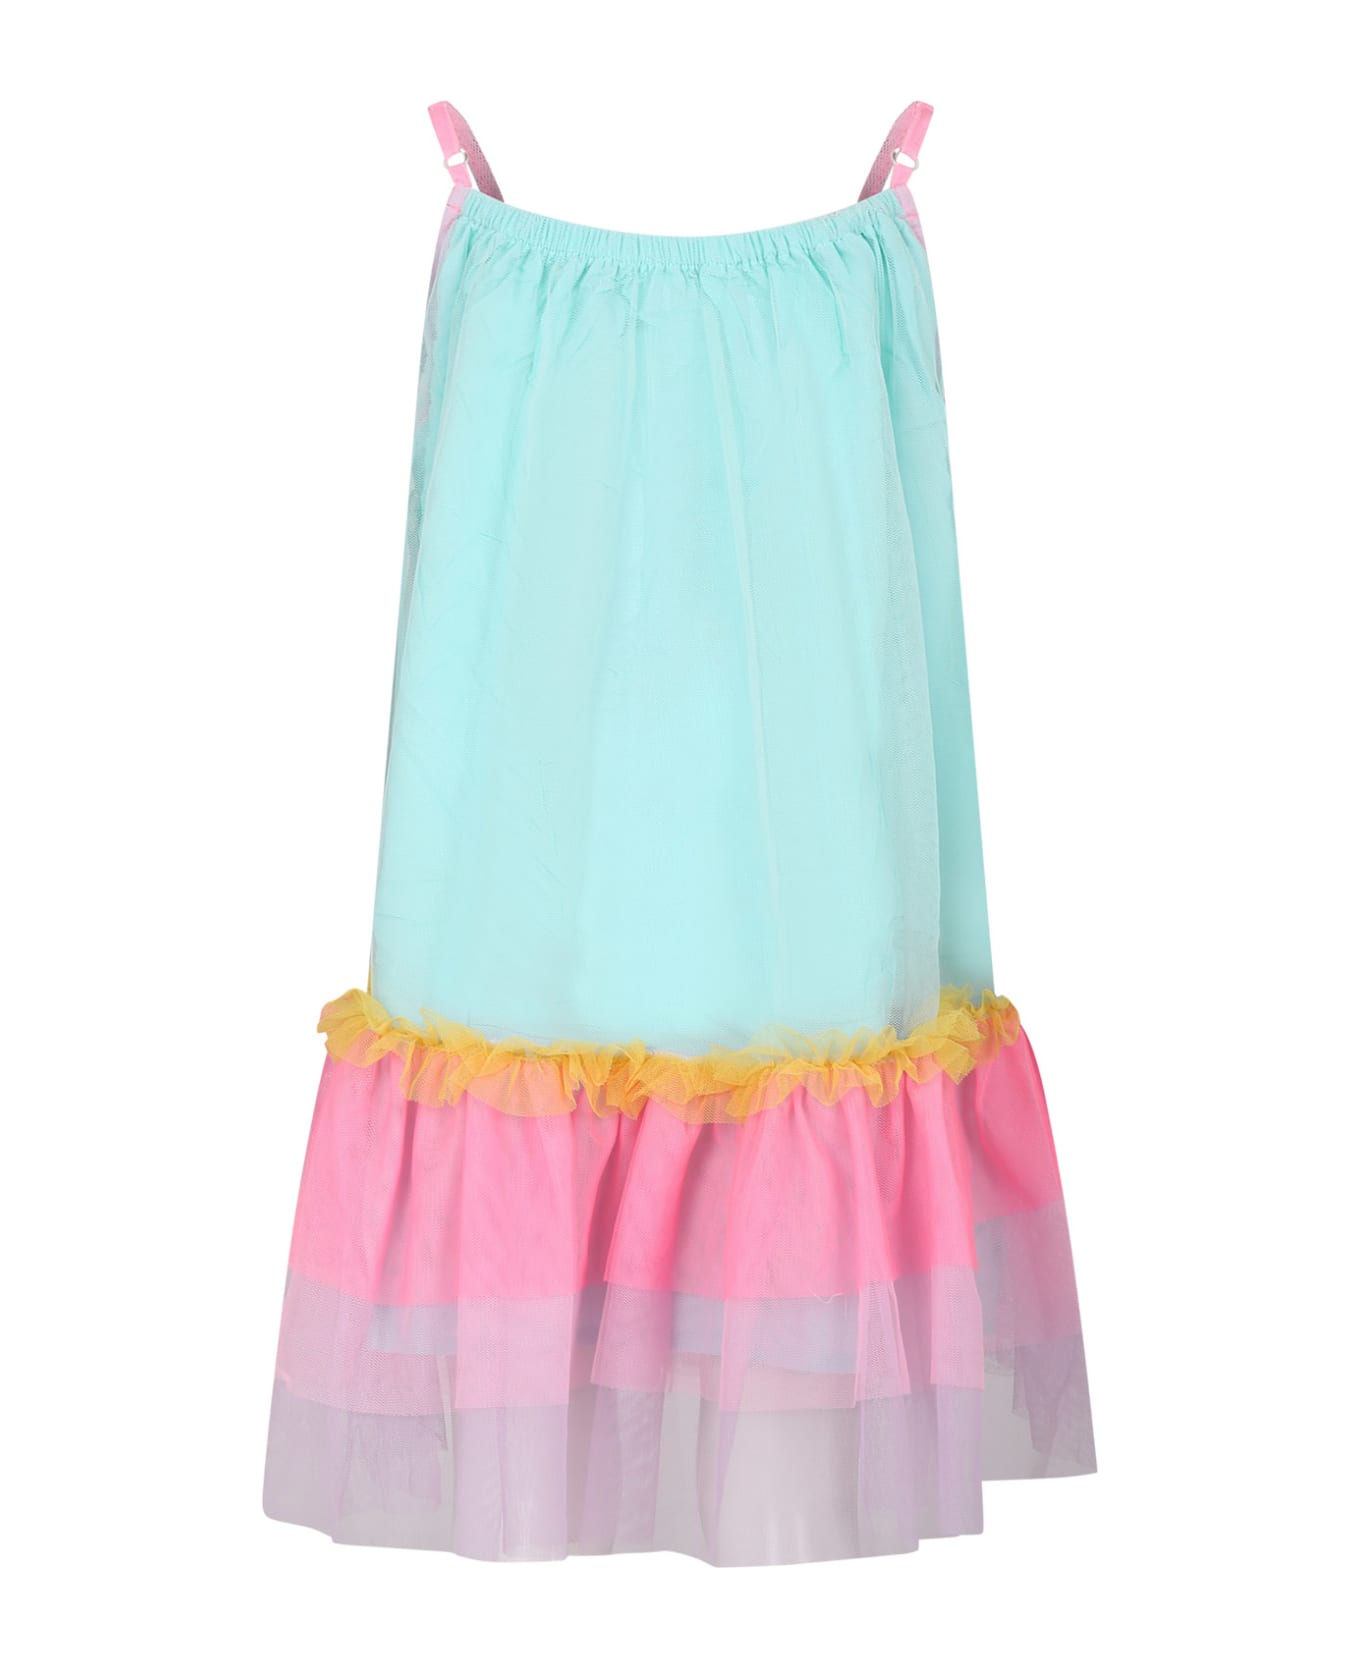 Billieblush Multicolor Dress For Girl With Ruffles And Flounces - Multicolor ワンピース＆ドレス